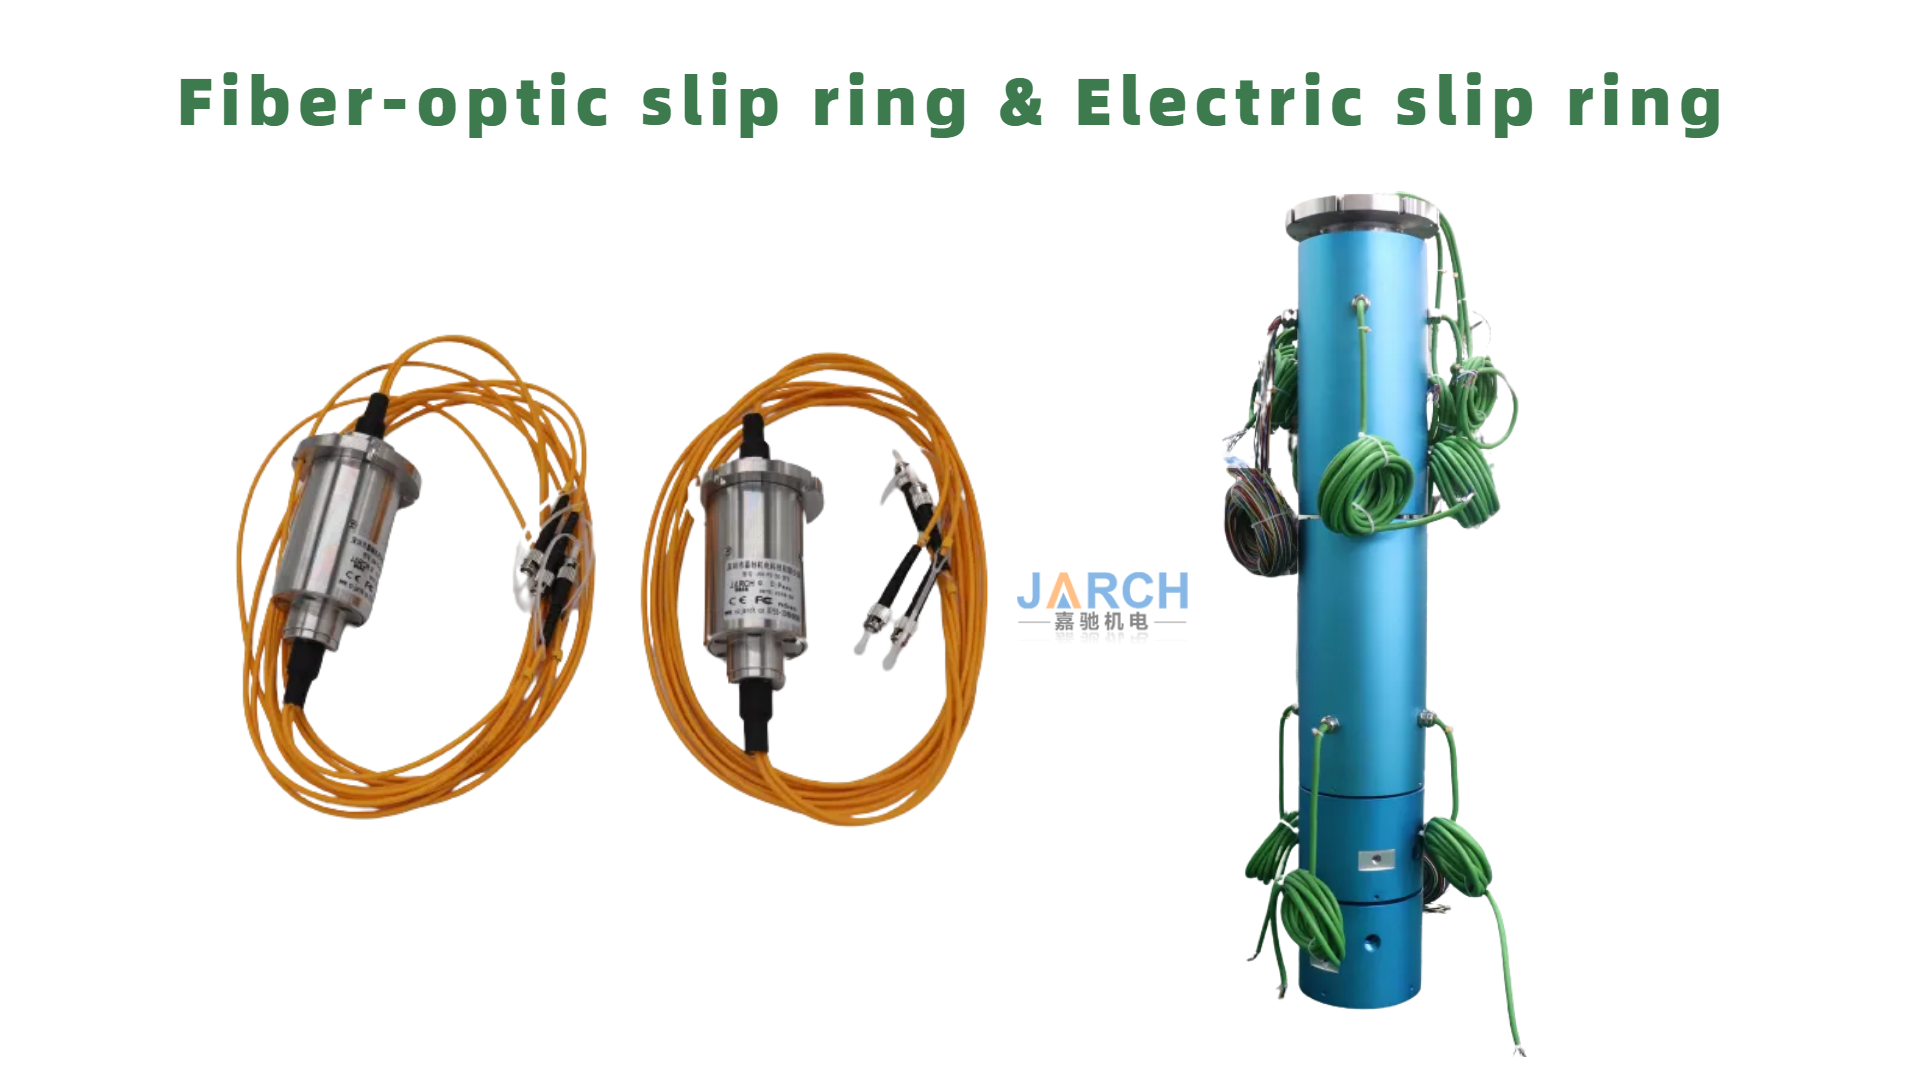 What are the differences between fiber-optic slip ring and electrical slip ring?